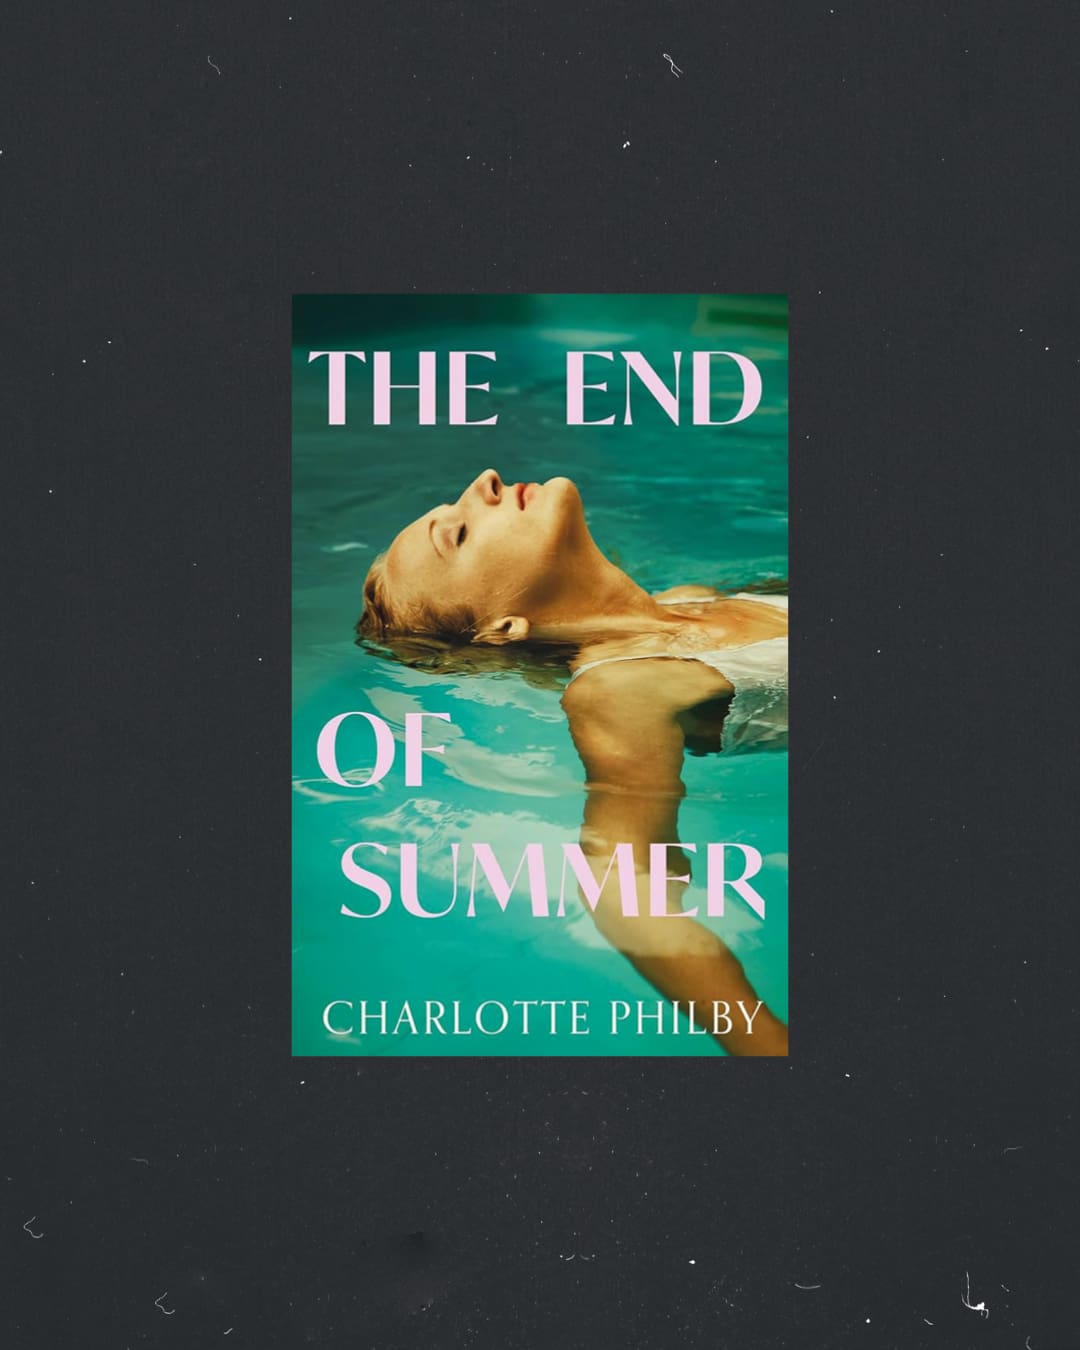 The End of Summer book cover by Charlotte Philby